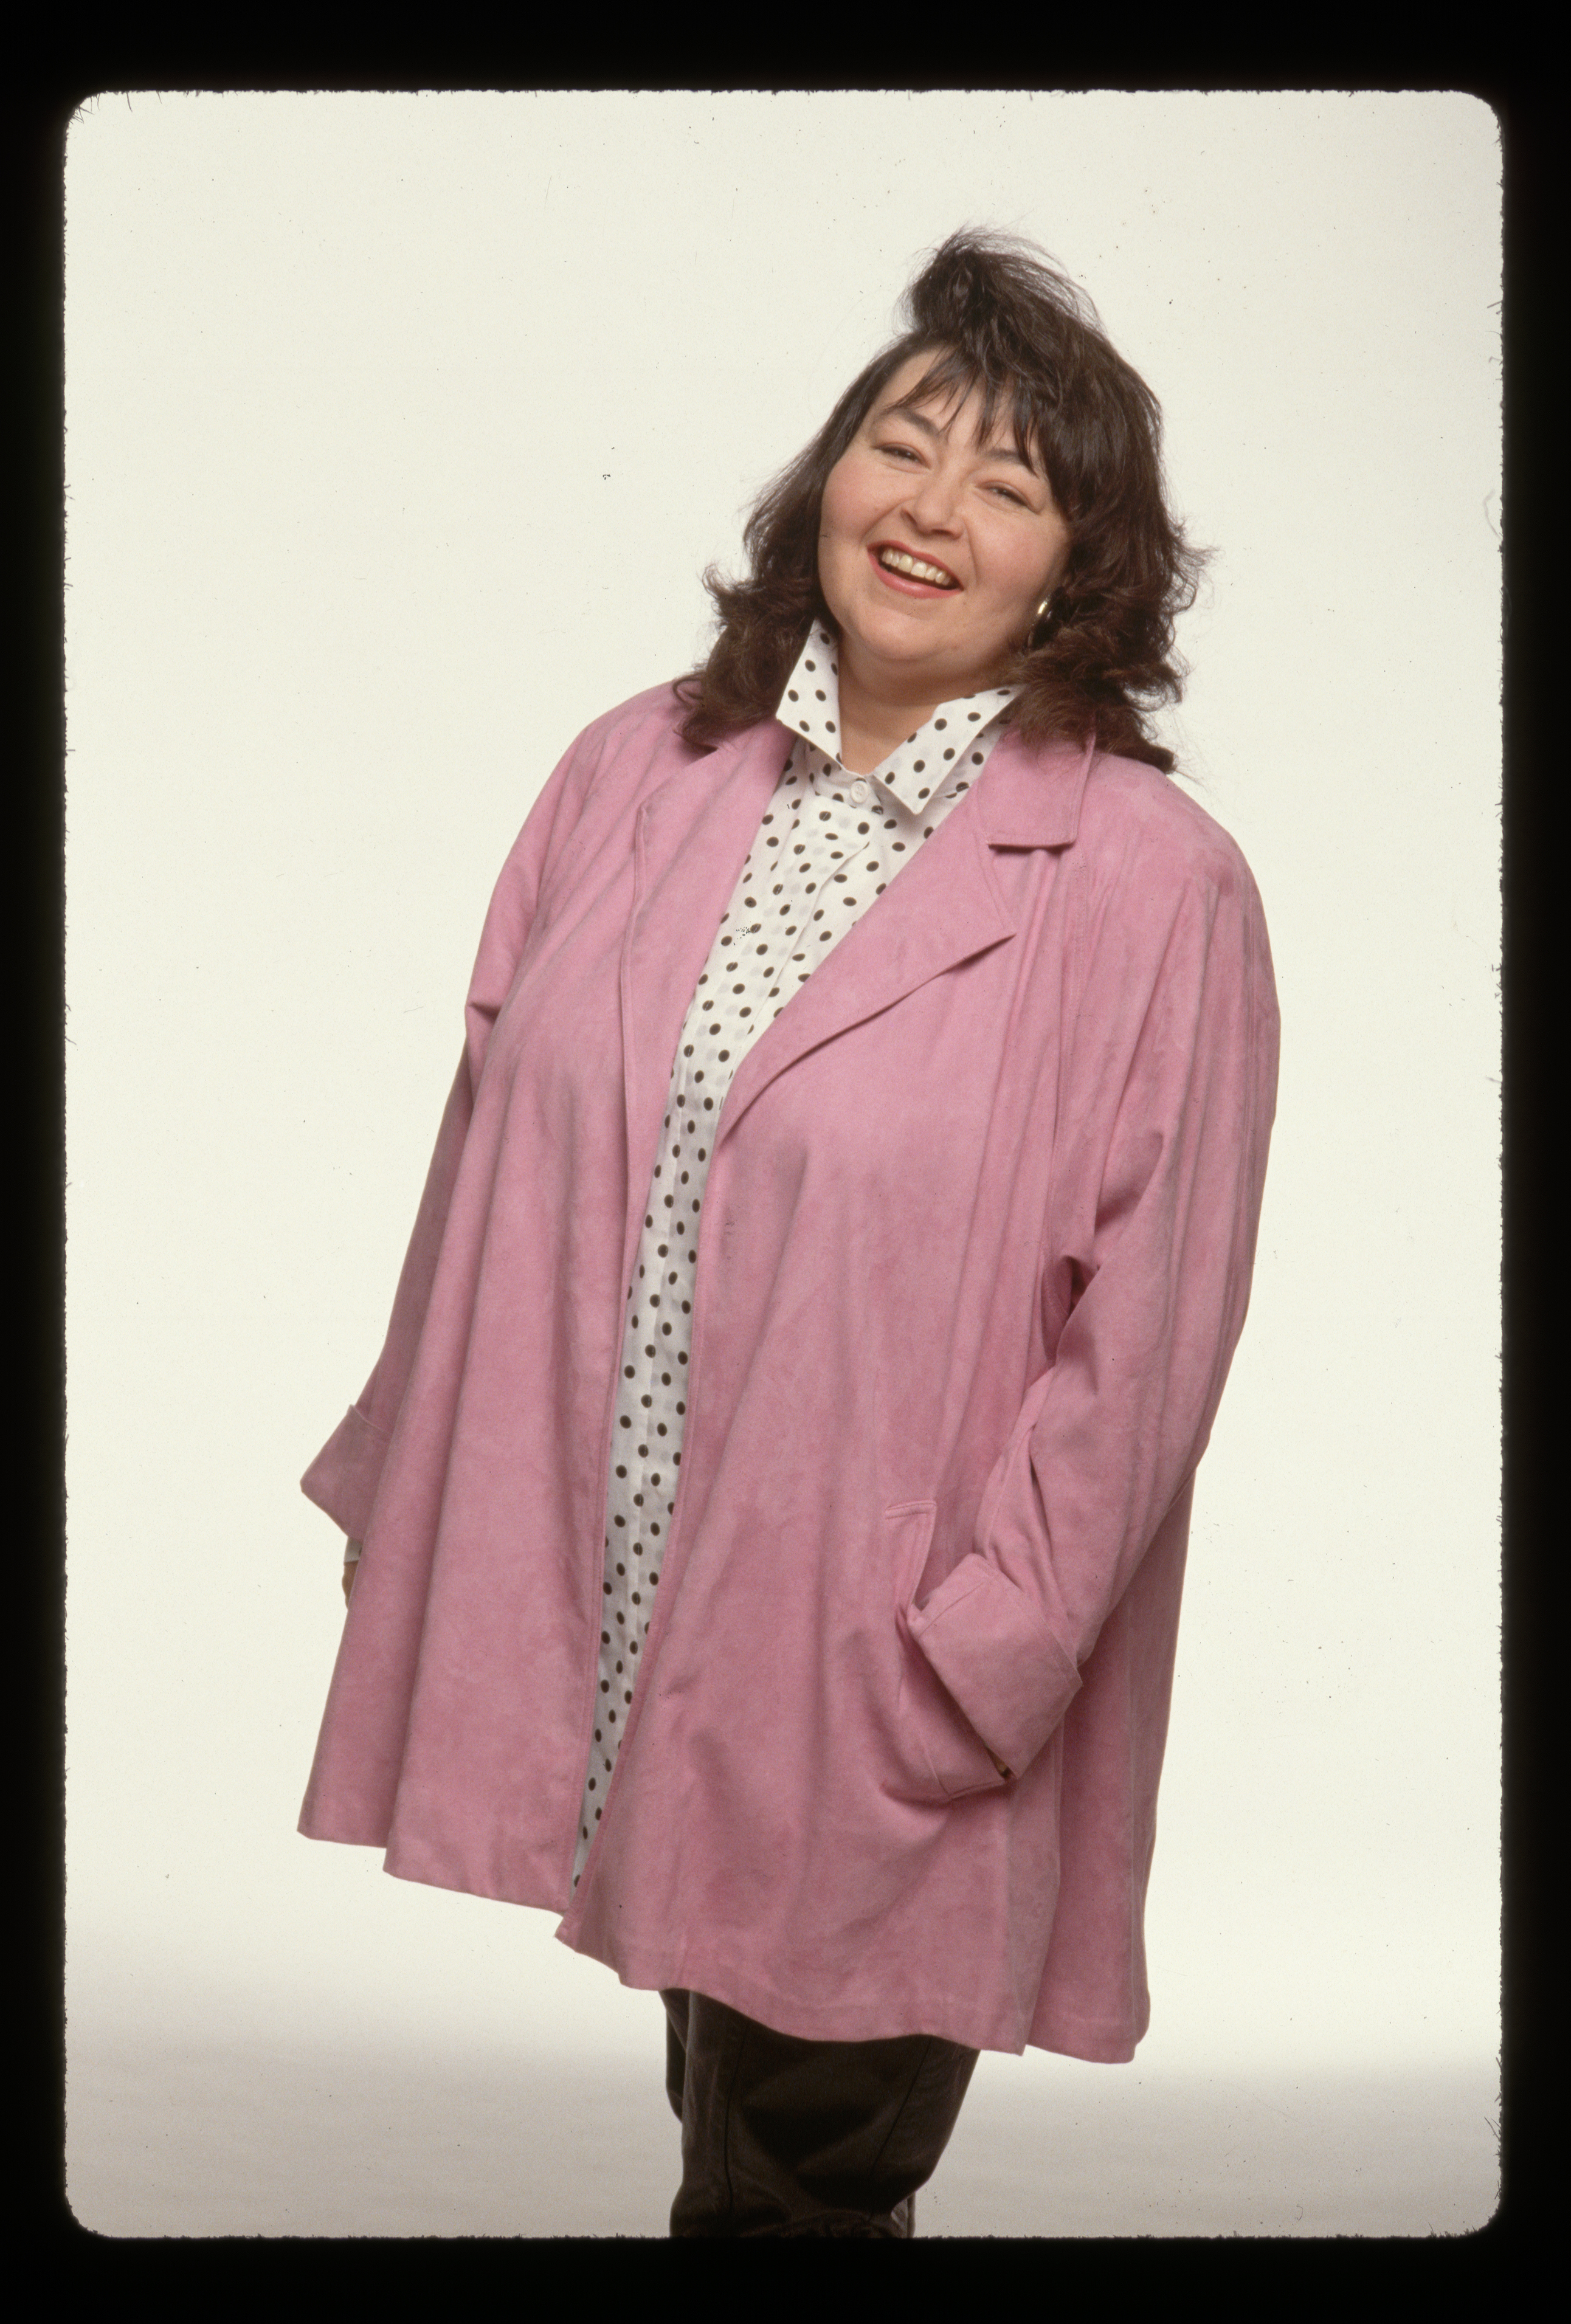 Comedienne Roseanne Barr, circa 1989 | Source: Getty Images